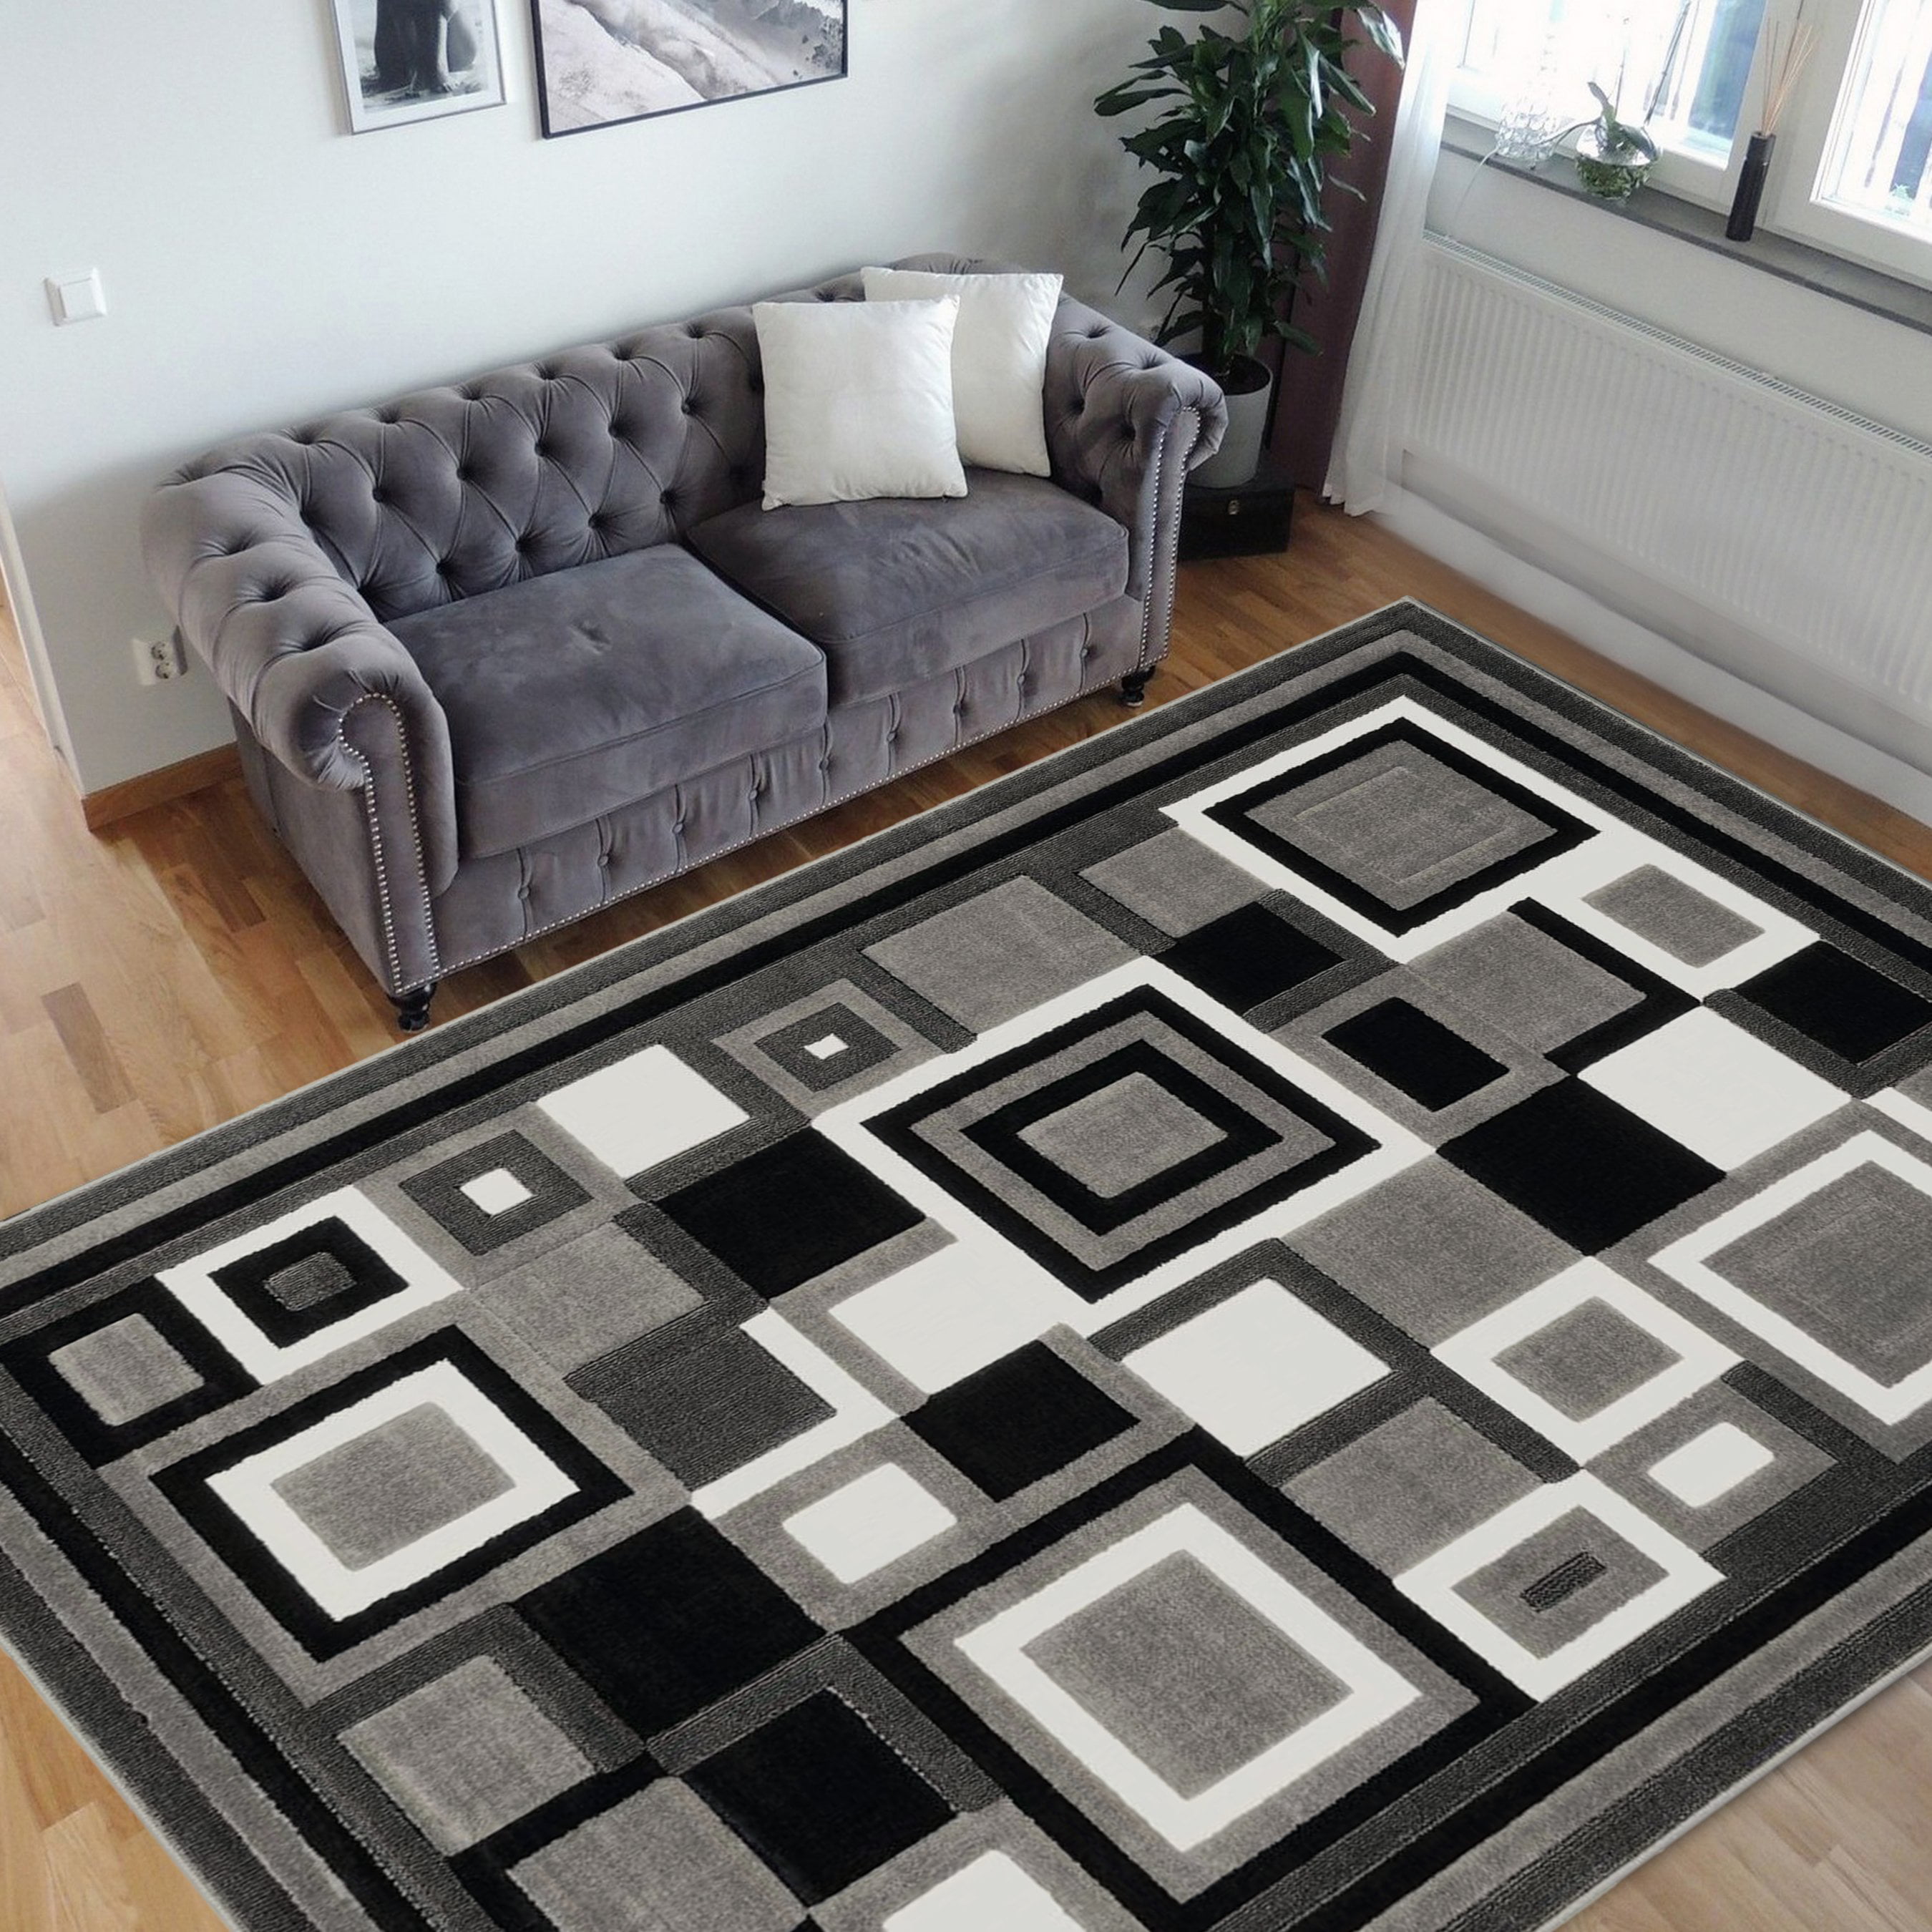 SUPER STYLISH LIVING ROOM ABSTRACT CARPET RUG GRAY MULTI COLOR  AREA RUG LARGE 